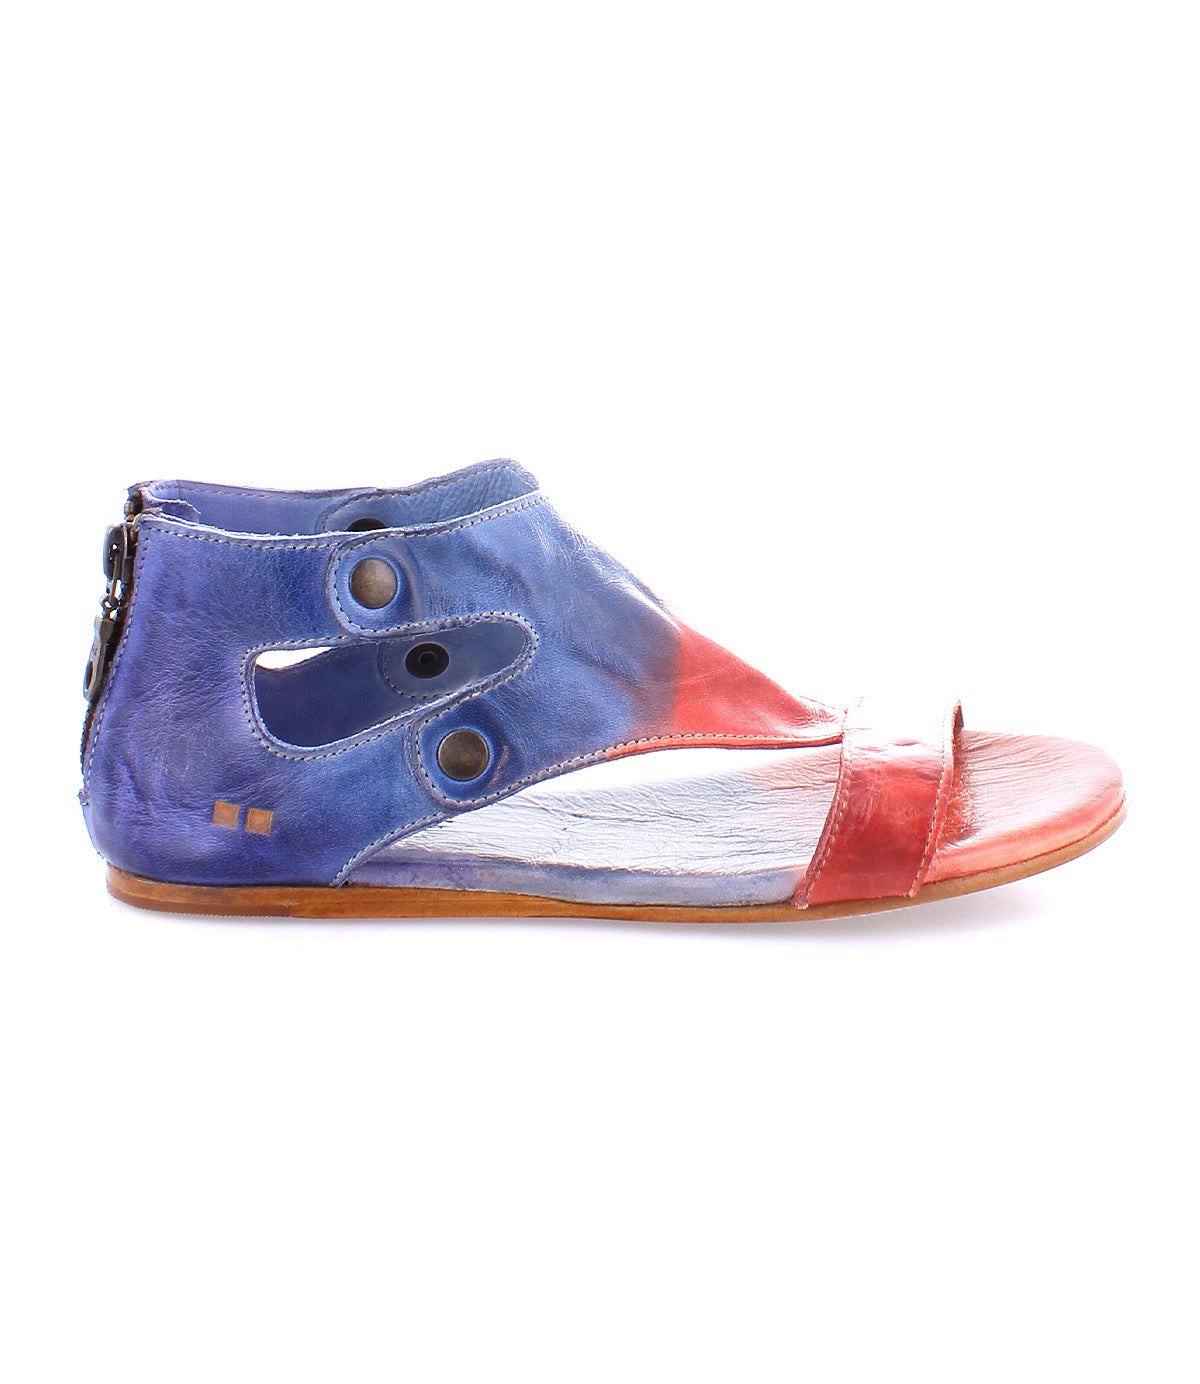 A single, colorful Soto shoe with an asymmetrical cutout design, featuring blue and red panels, a pointed toe, and a zipper on the side by Bed Stu.